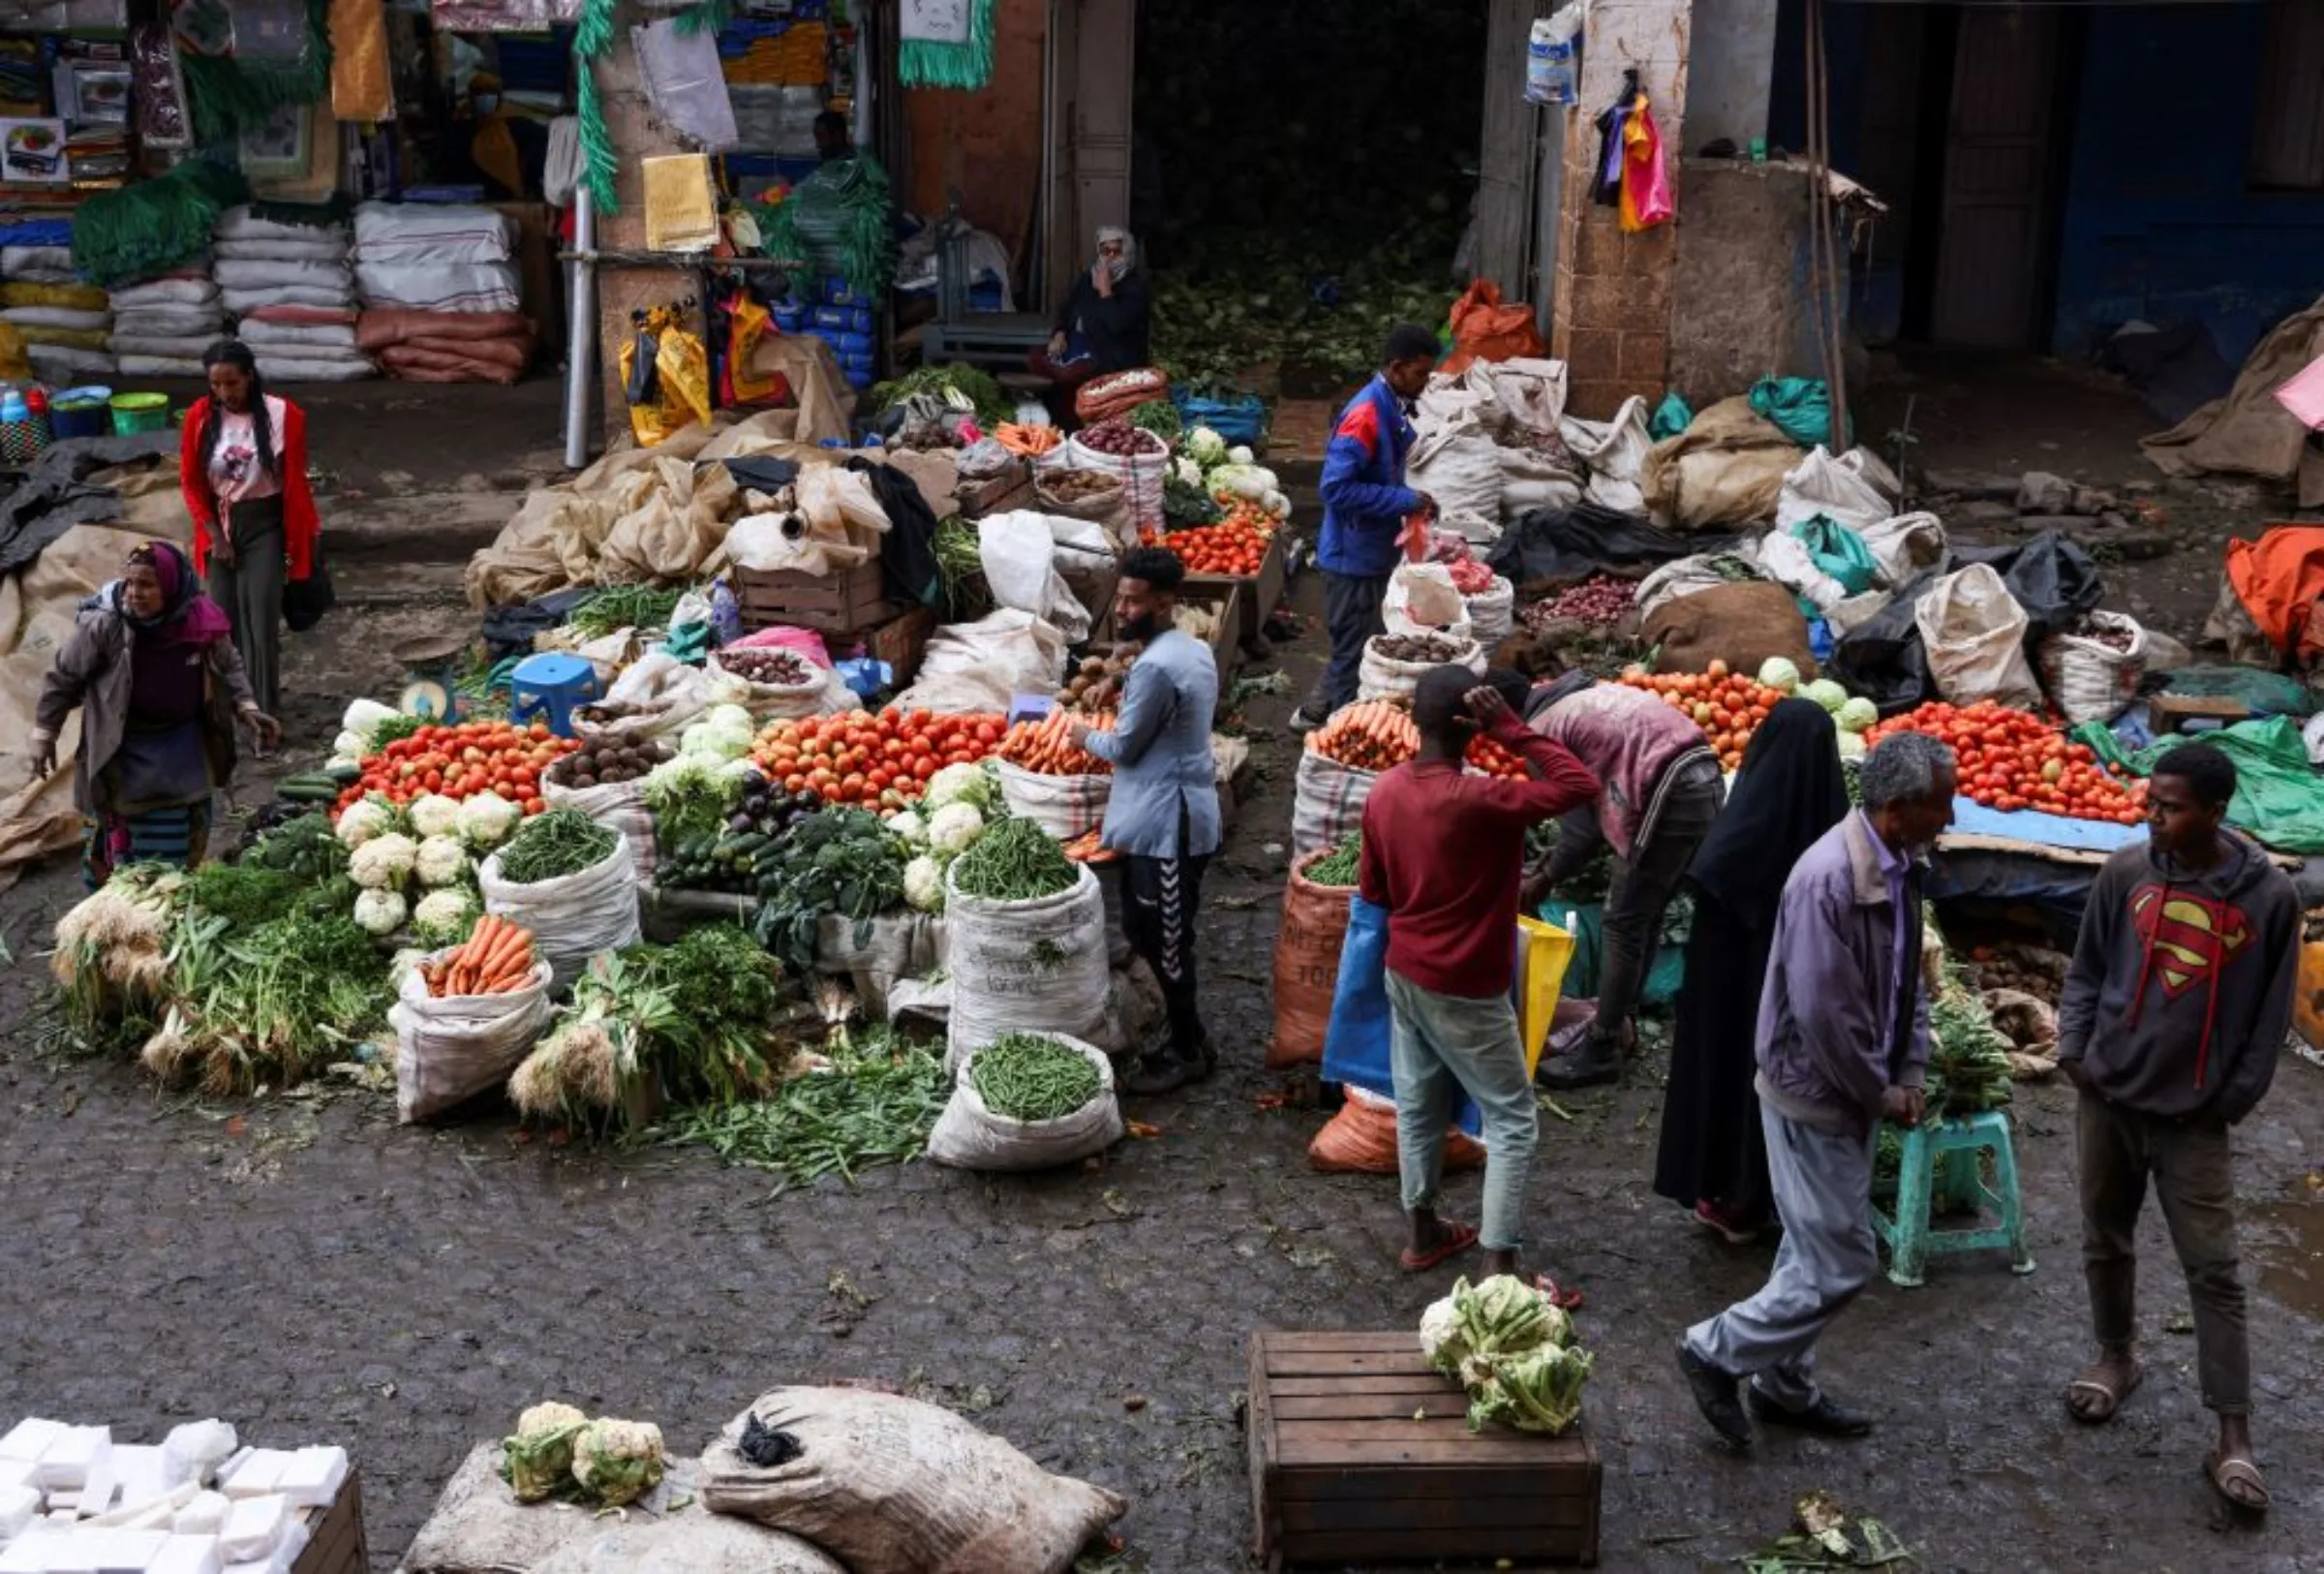 A view shows groceries at the Mercato open-air marketplace in Ketema, district of Addis Ababa, Ethiopia July 21, 2022